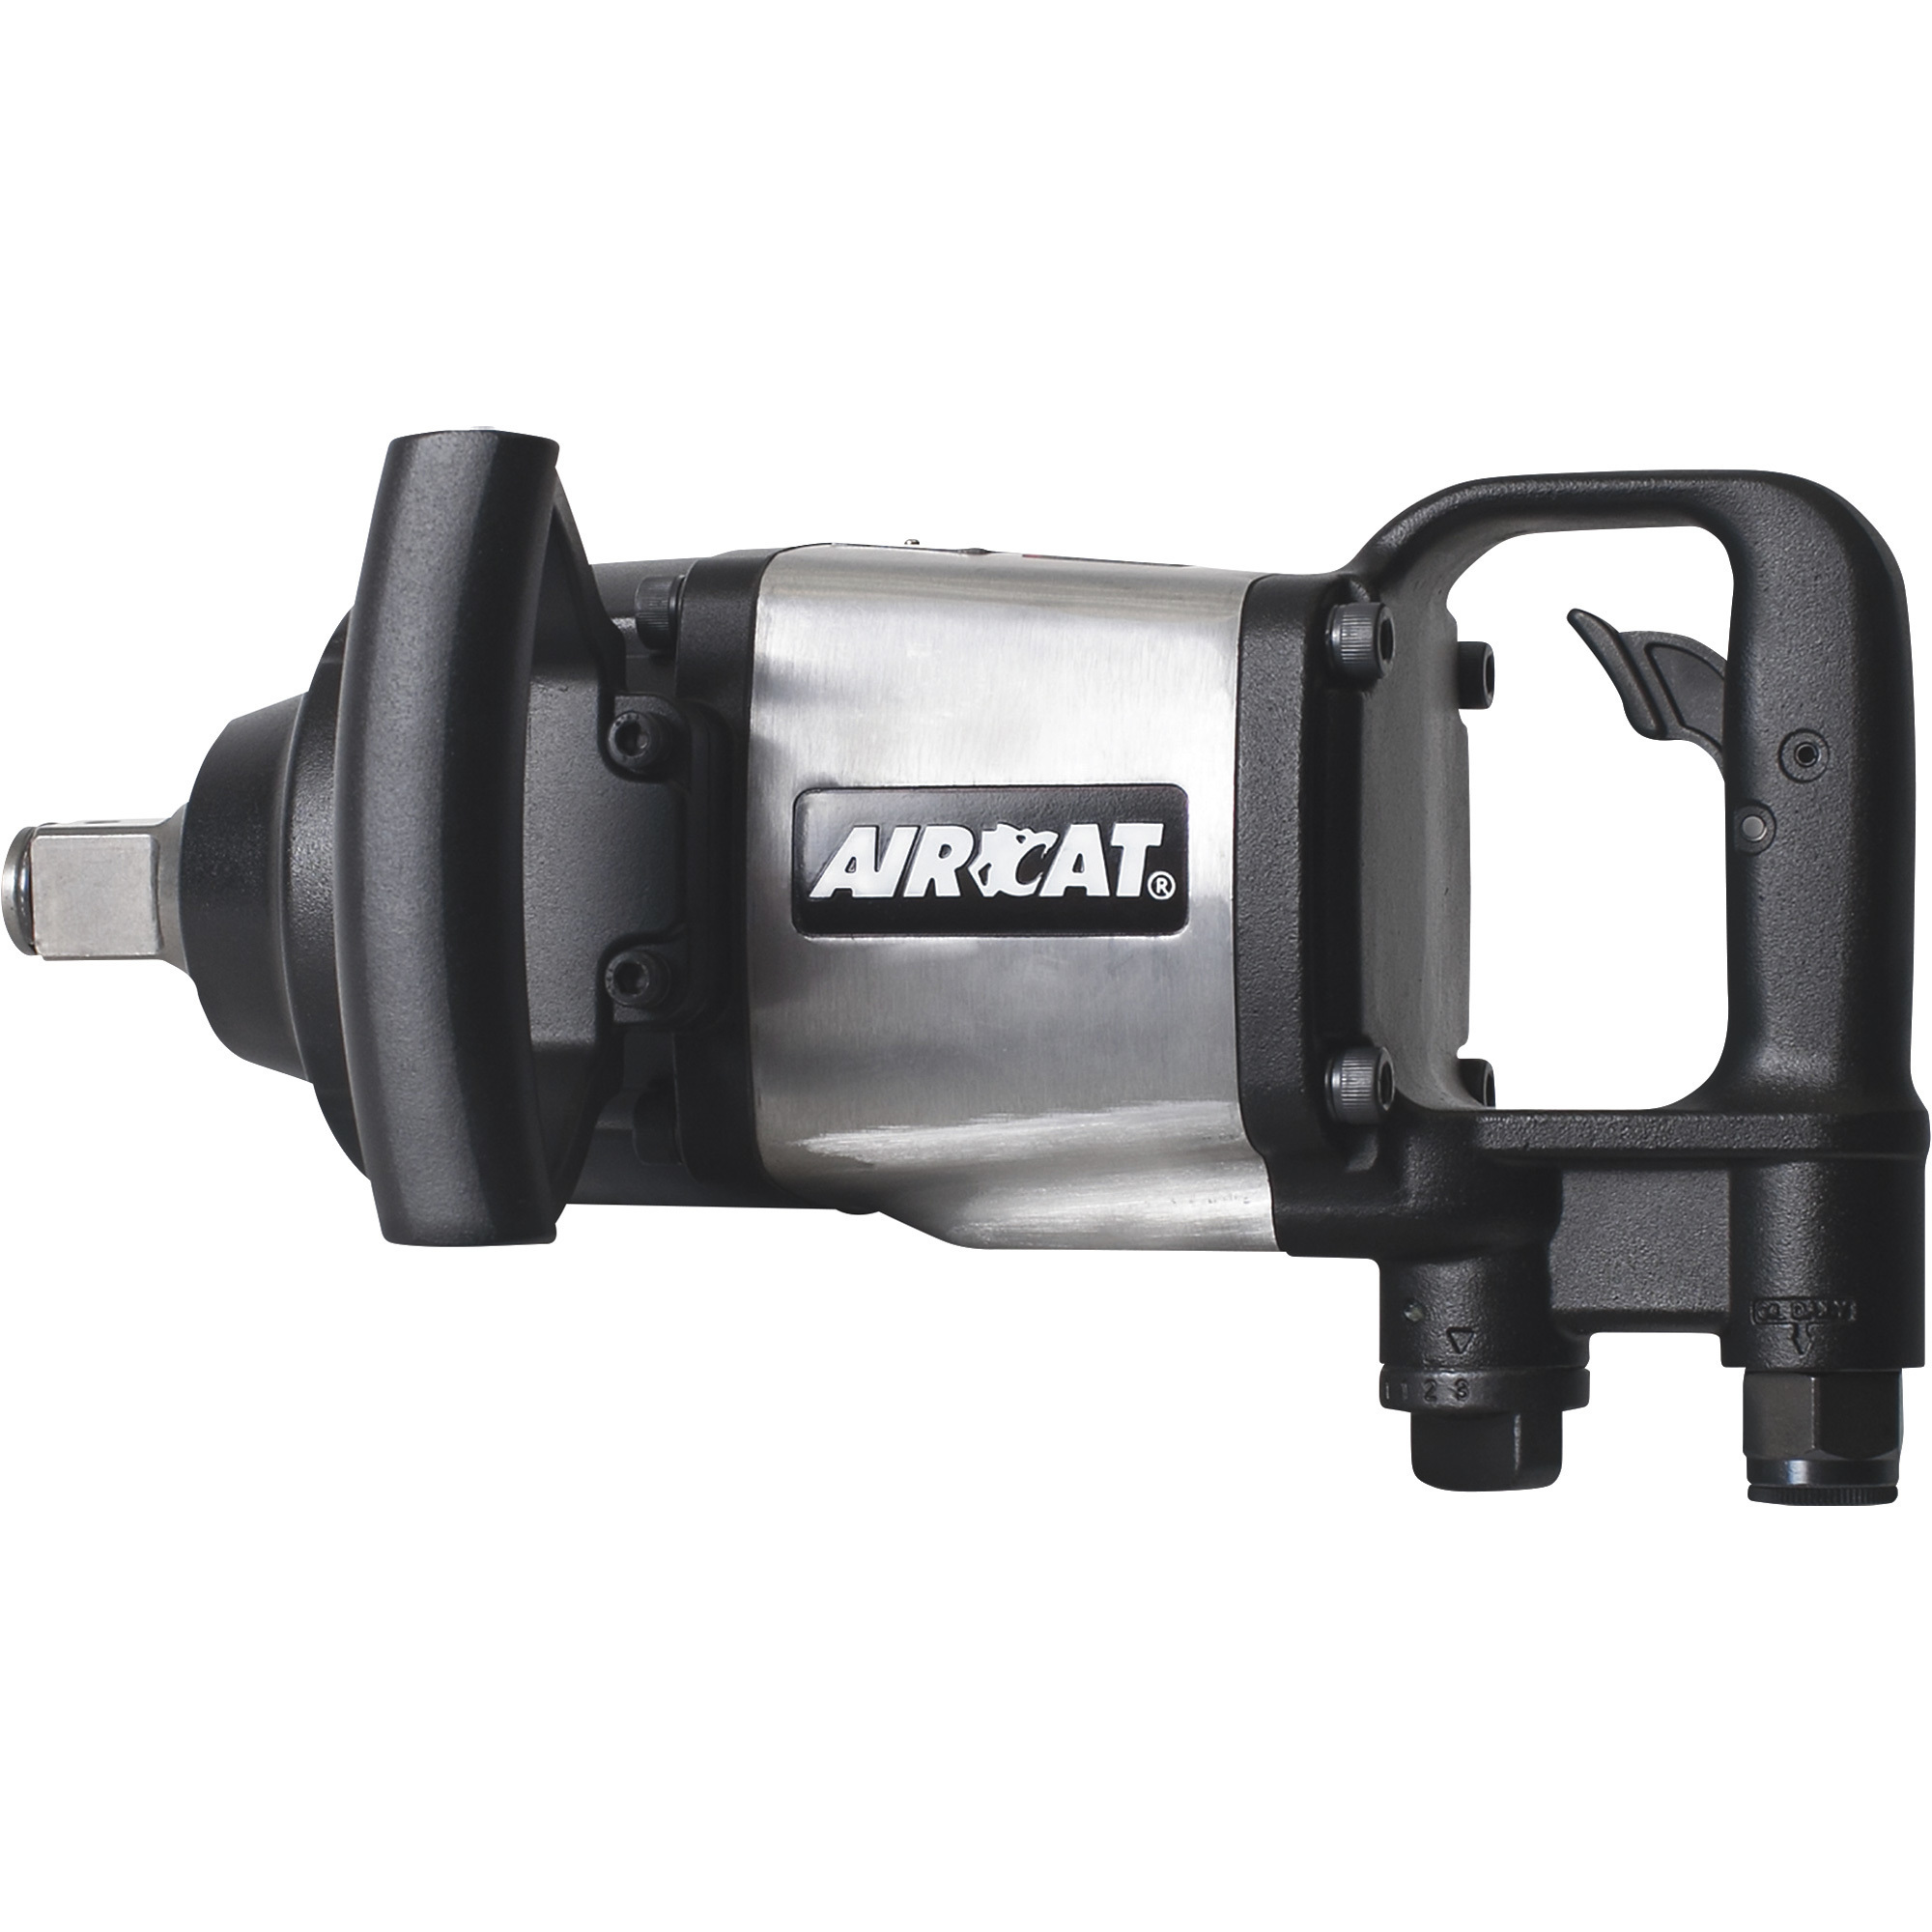 AIRCAT Pinless Hammer Air Impact Wrench, 1Inch Drive, 1800ft./lbs. Torque, Model 1893-1